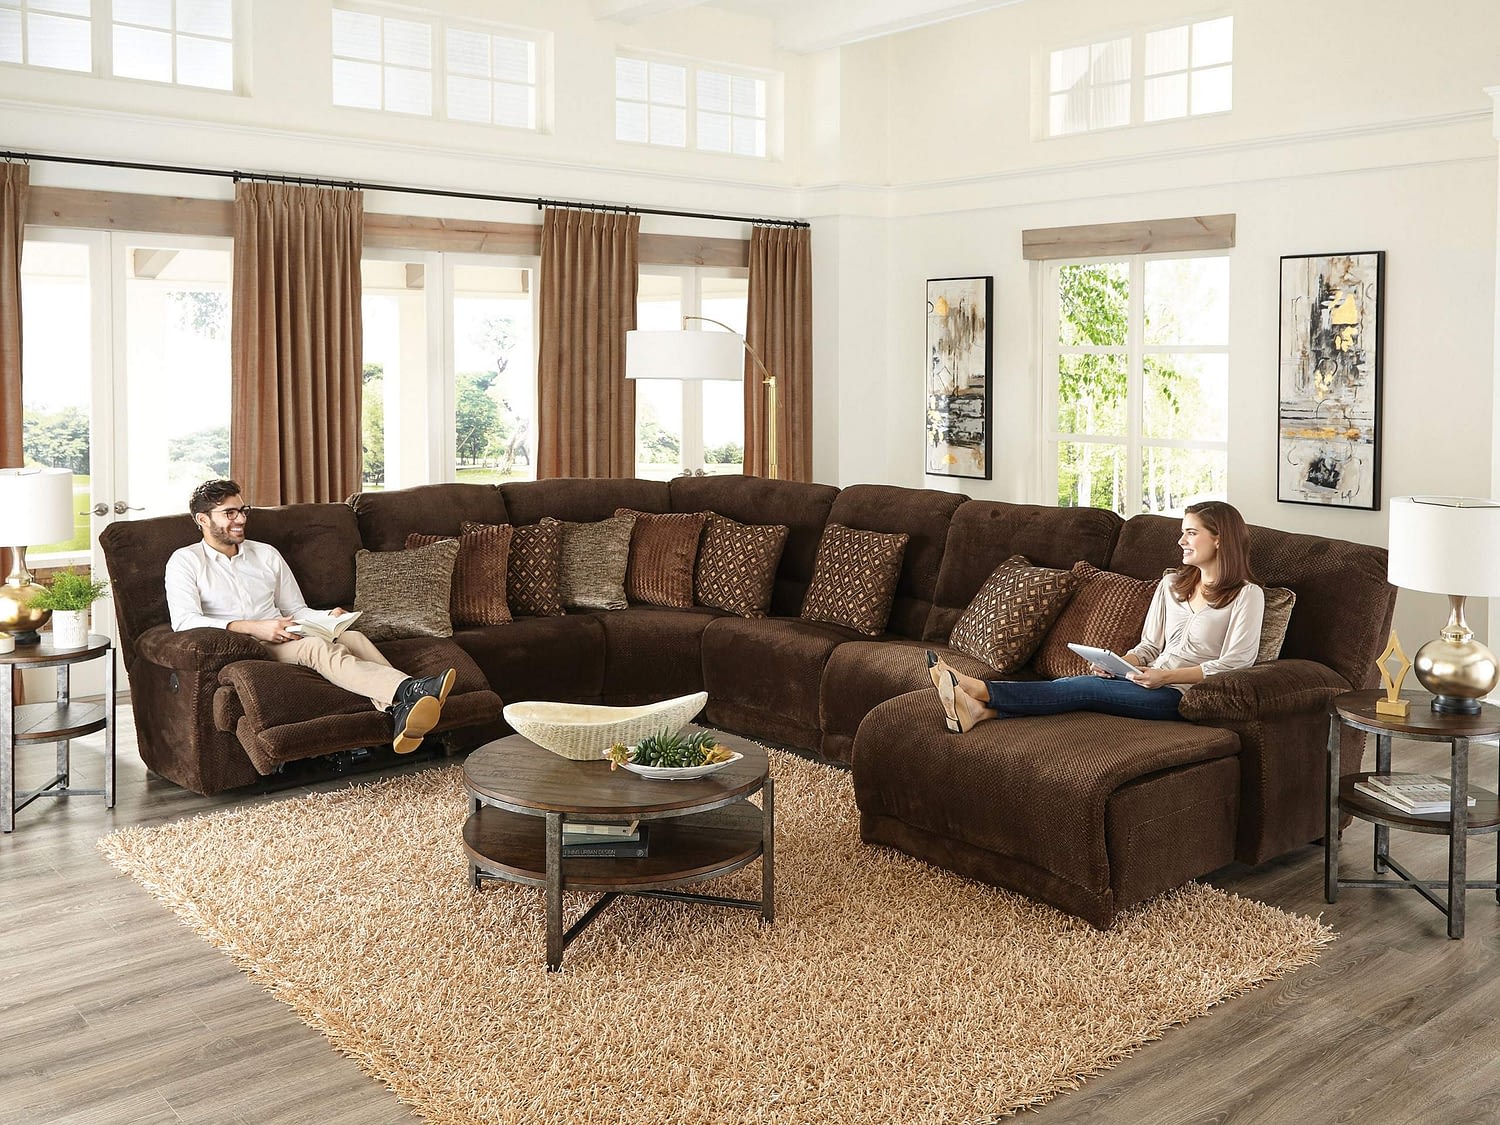 OLIVIA Reclining Sectional - Open